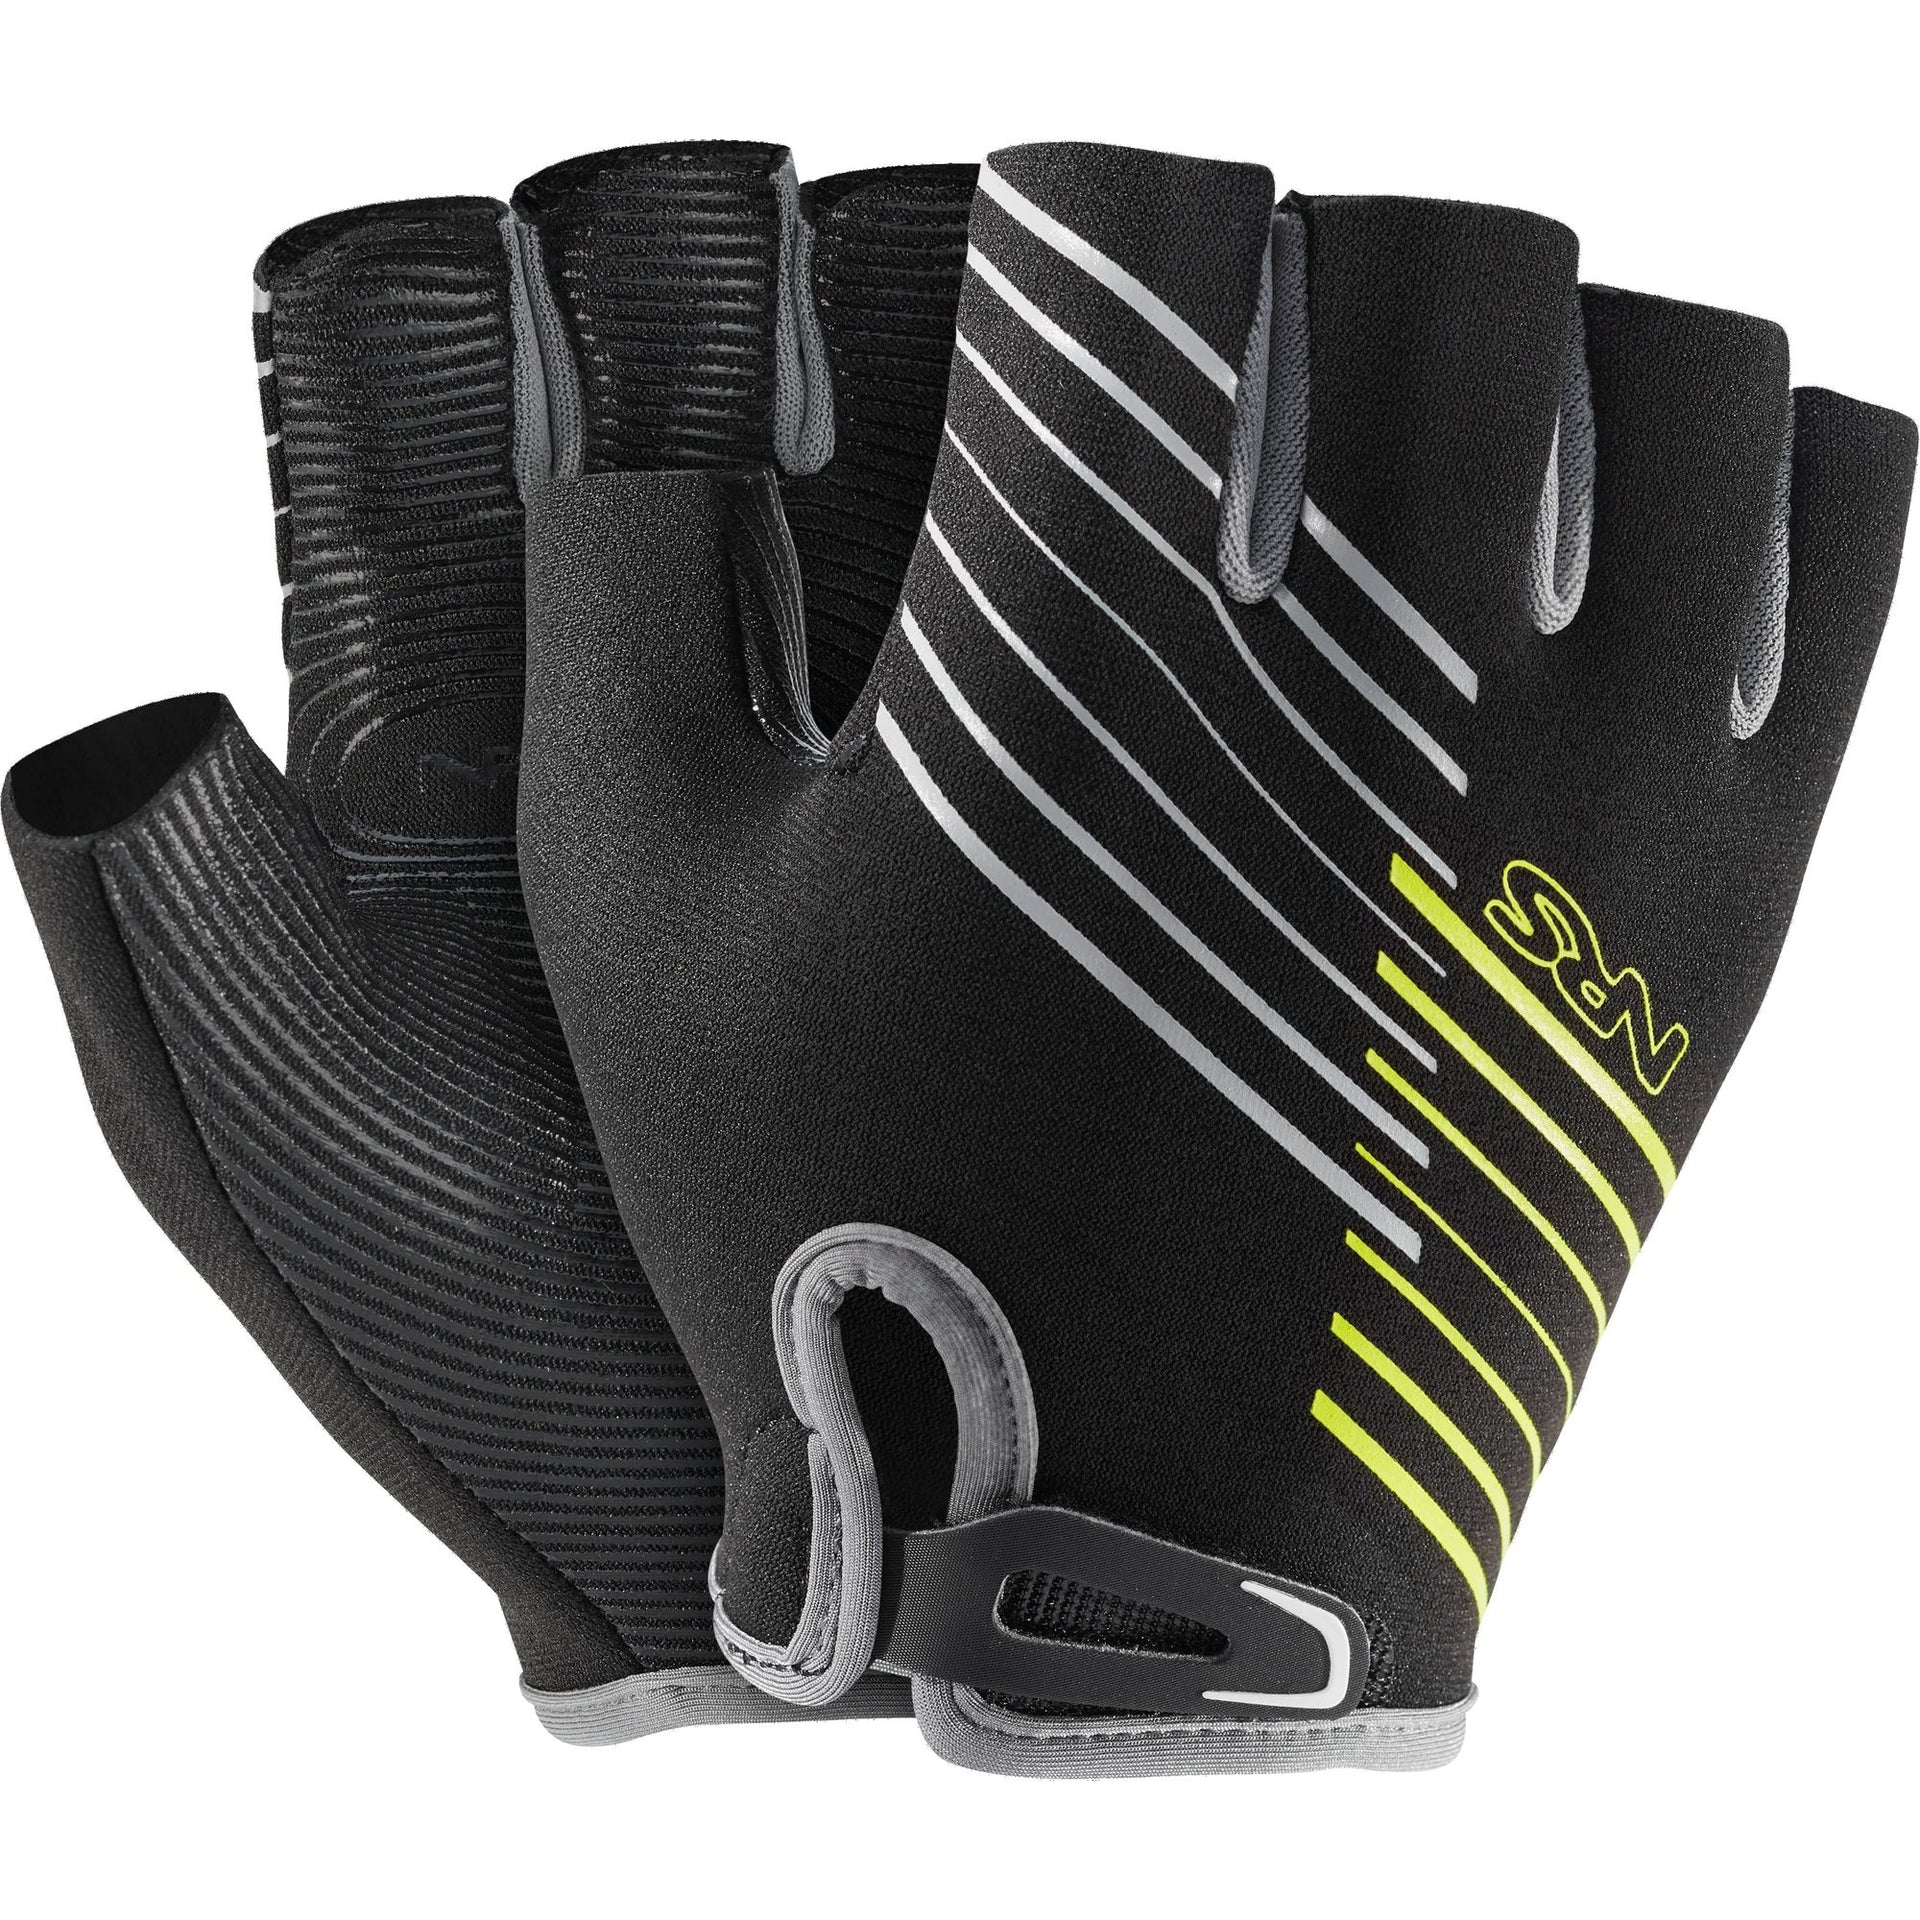 Guide Gloves - Closeout